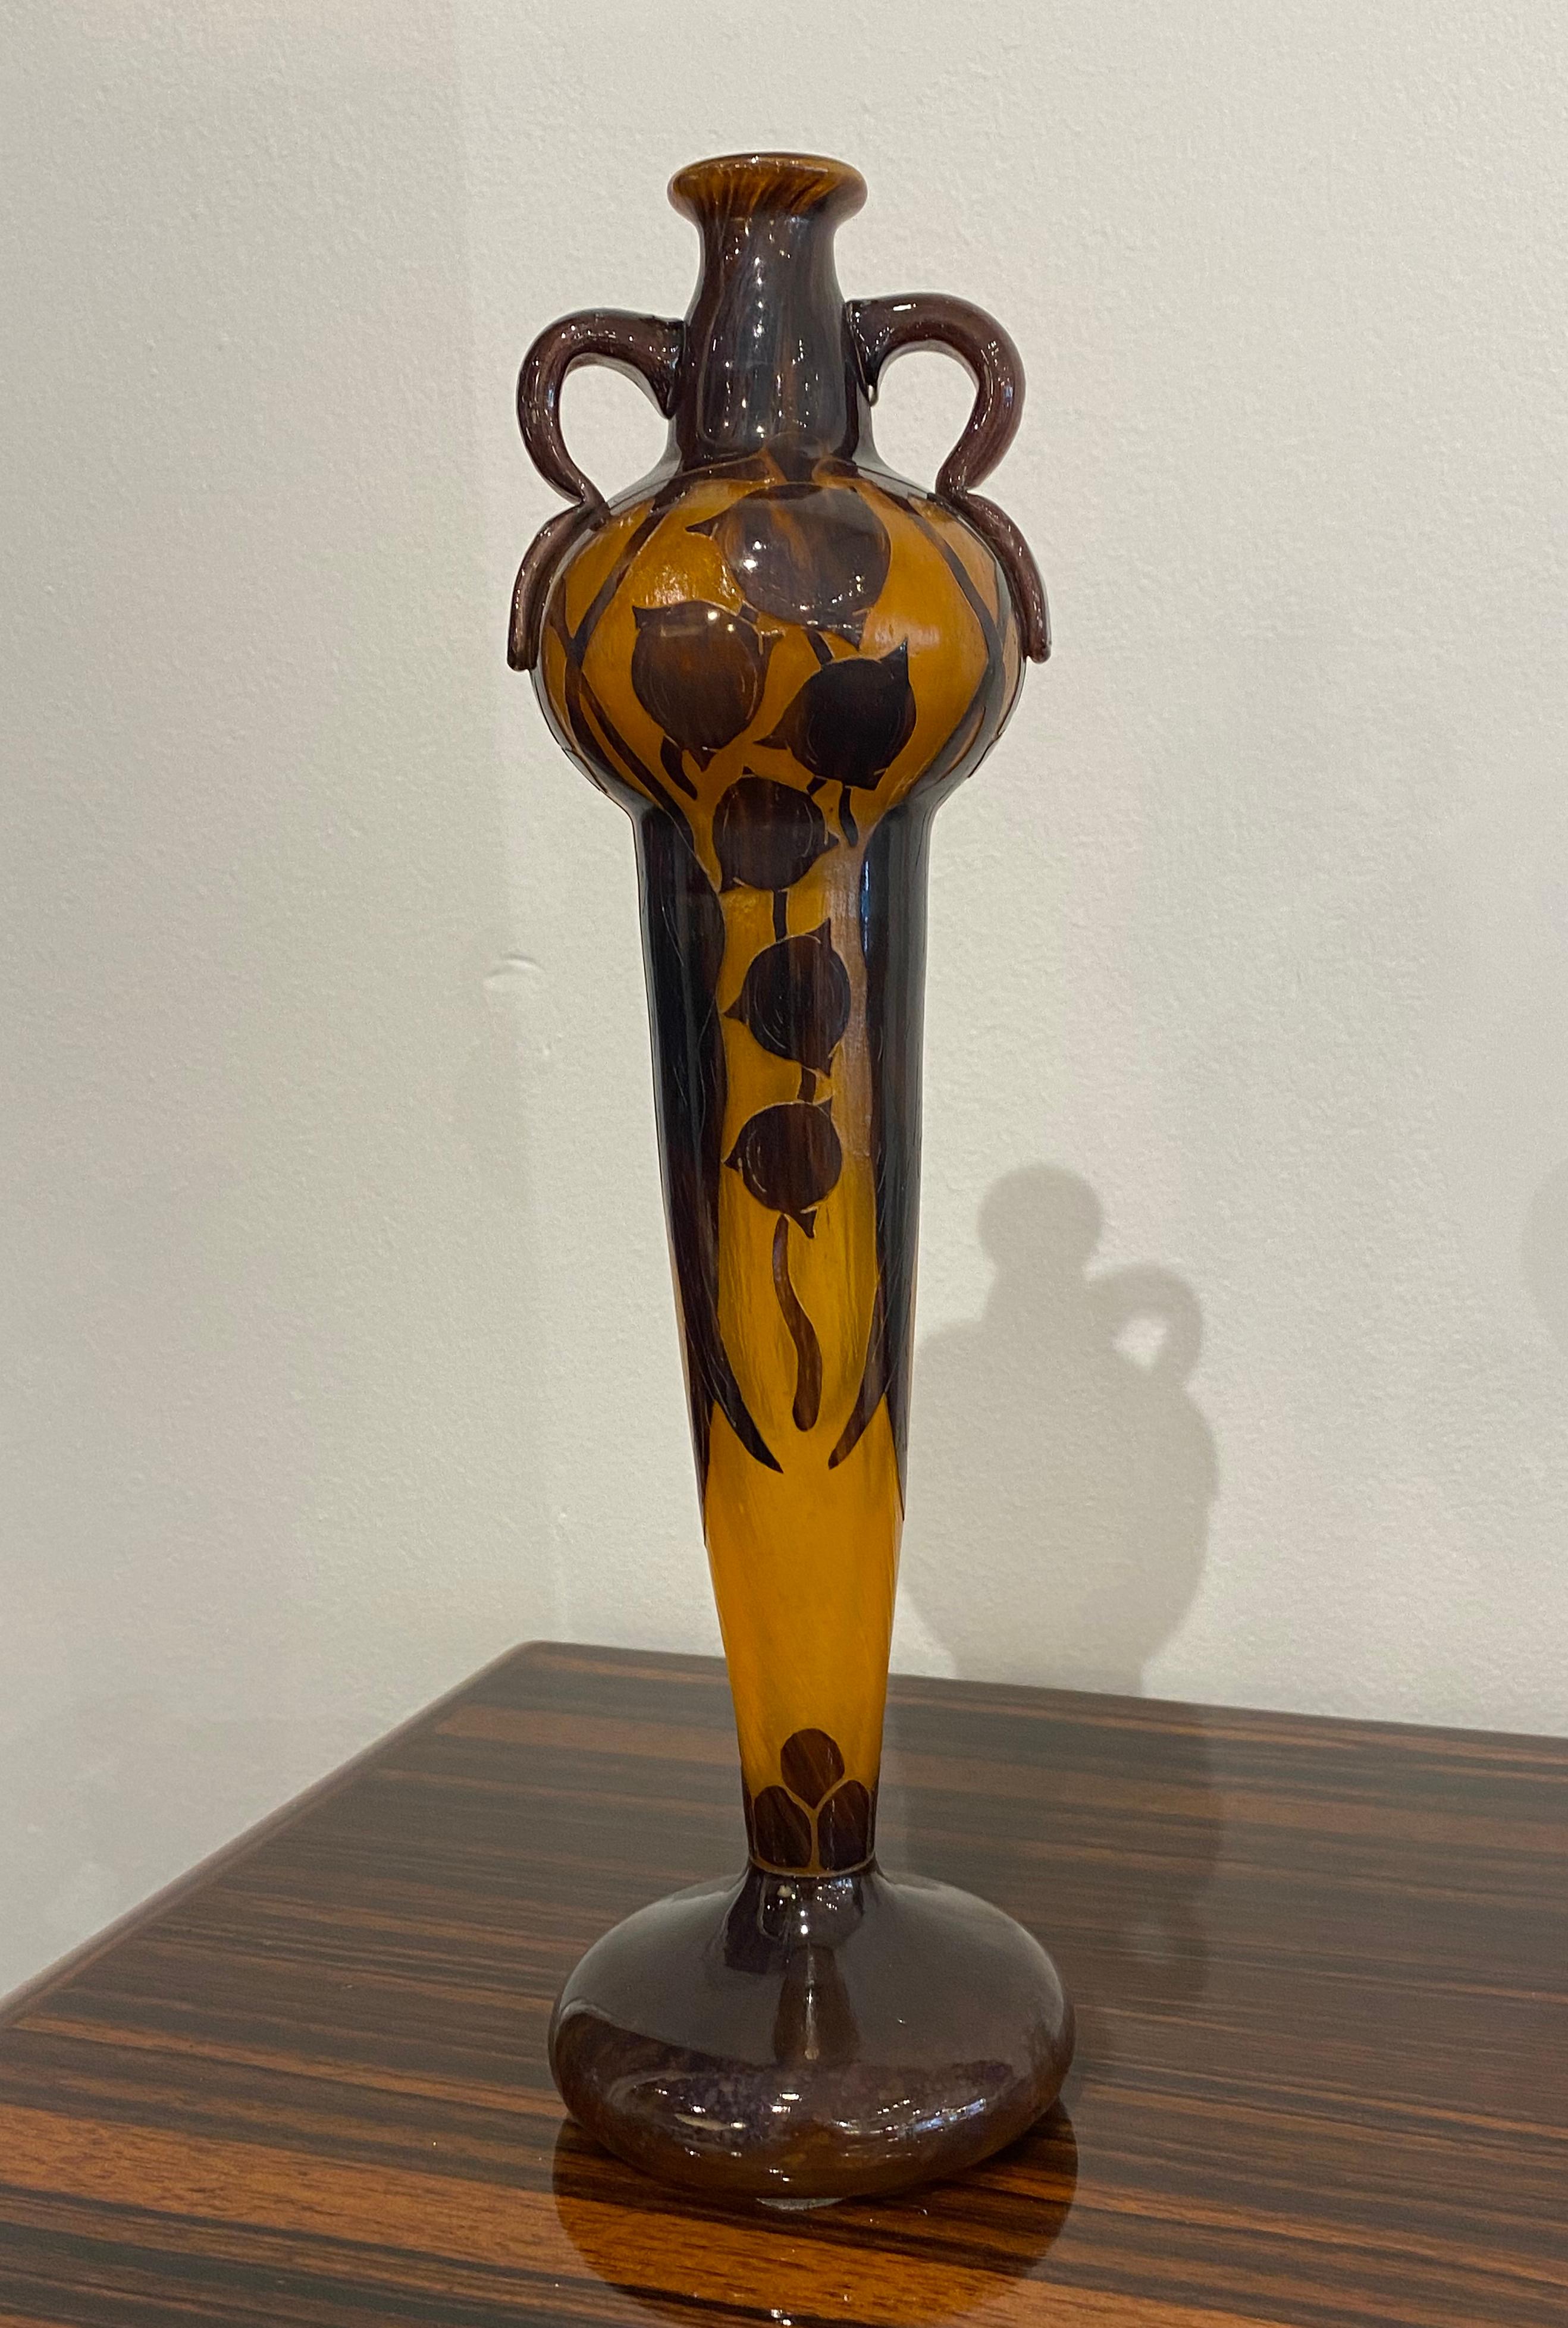 Art Deco glass vase in the cameo technique by Le Verre Francais depicting the Eucalyptus pattern, in orange and brown.
Made in France
Circa: 1919
Signature: candy cane in the vase.